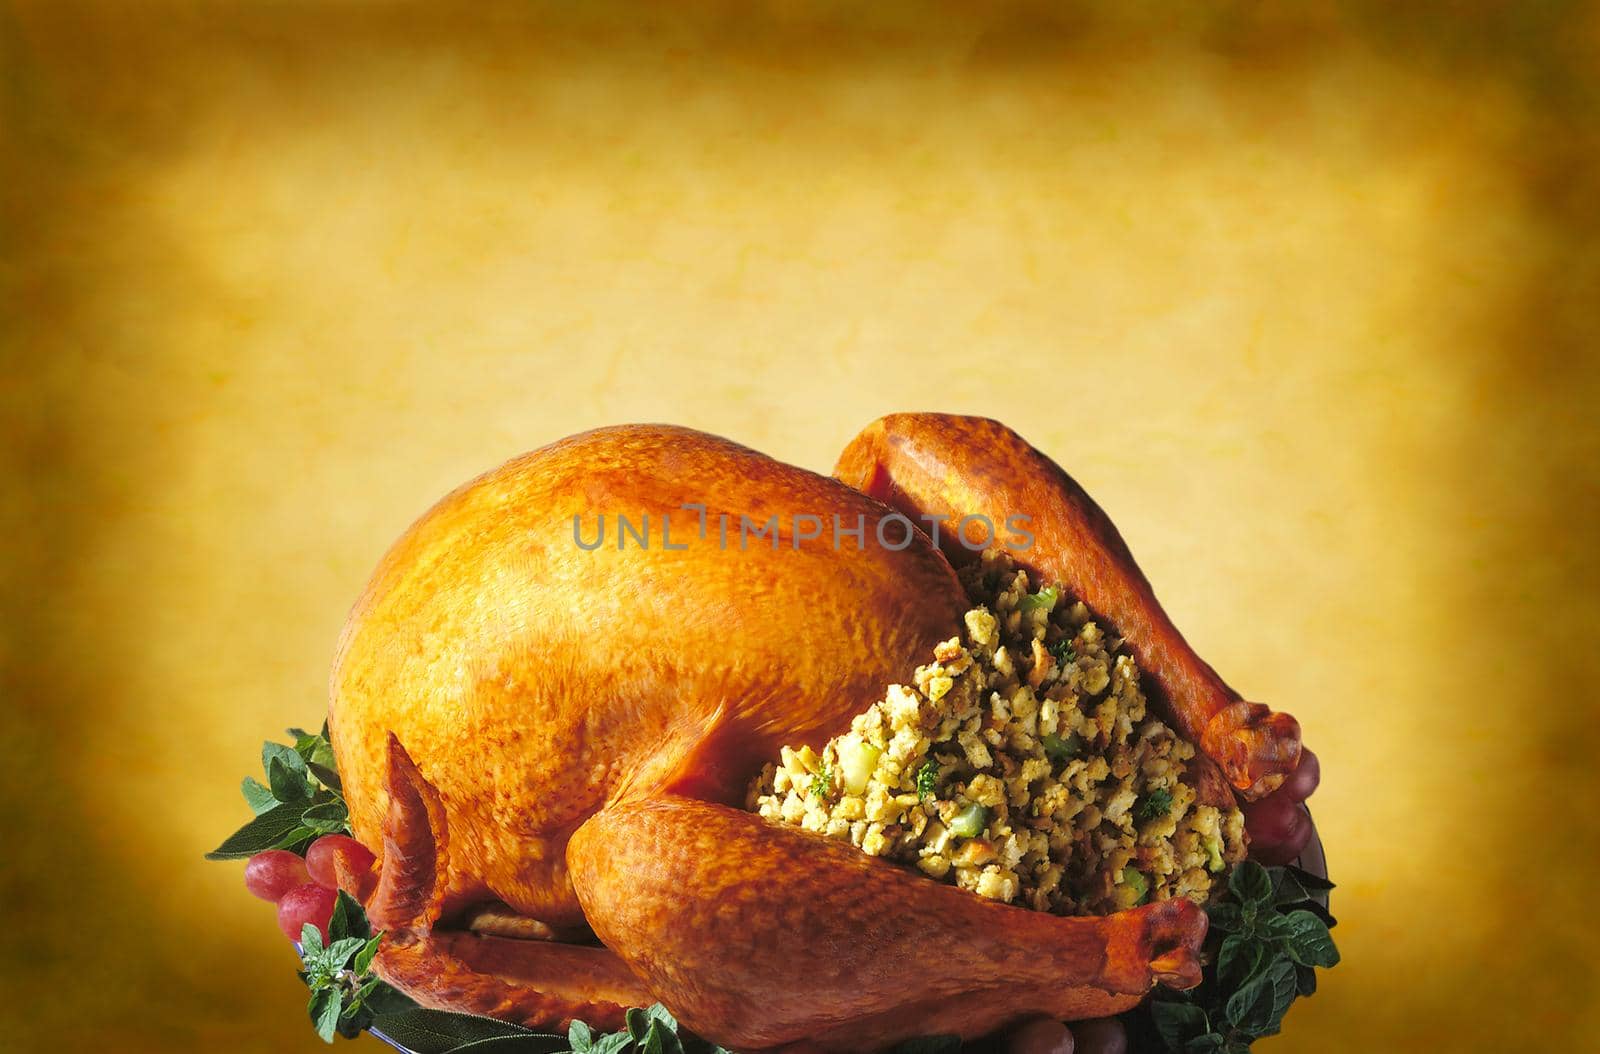 A roasted Thanksgiving turkey with all the trimmings on a warm yellow mottled background.